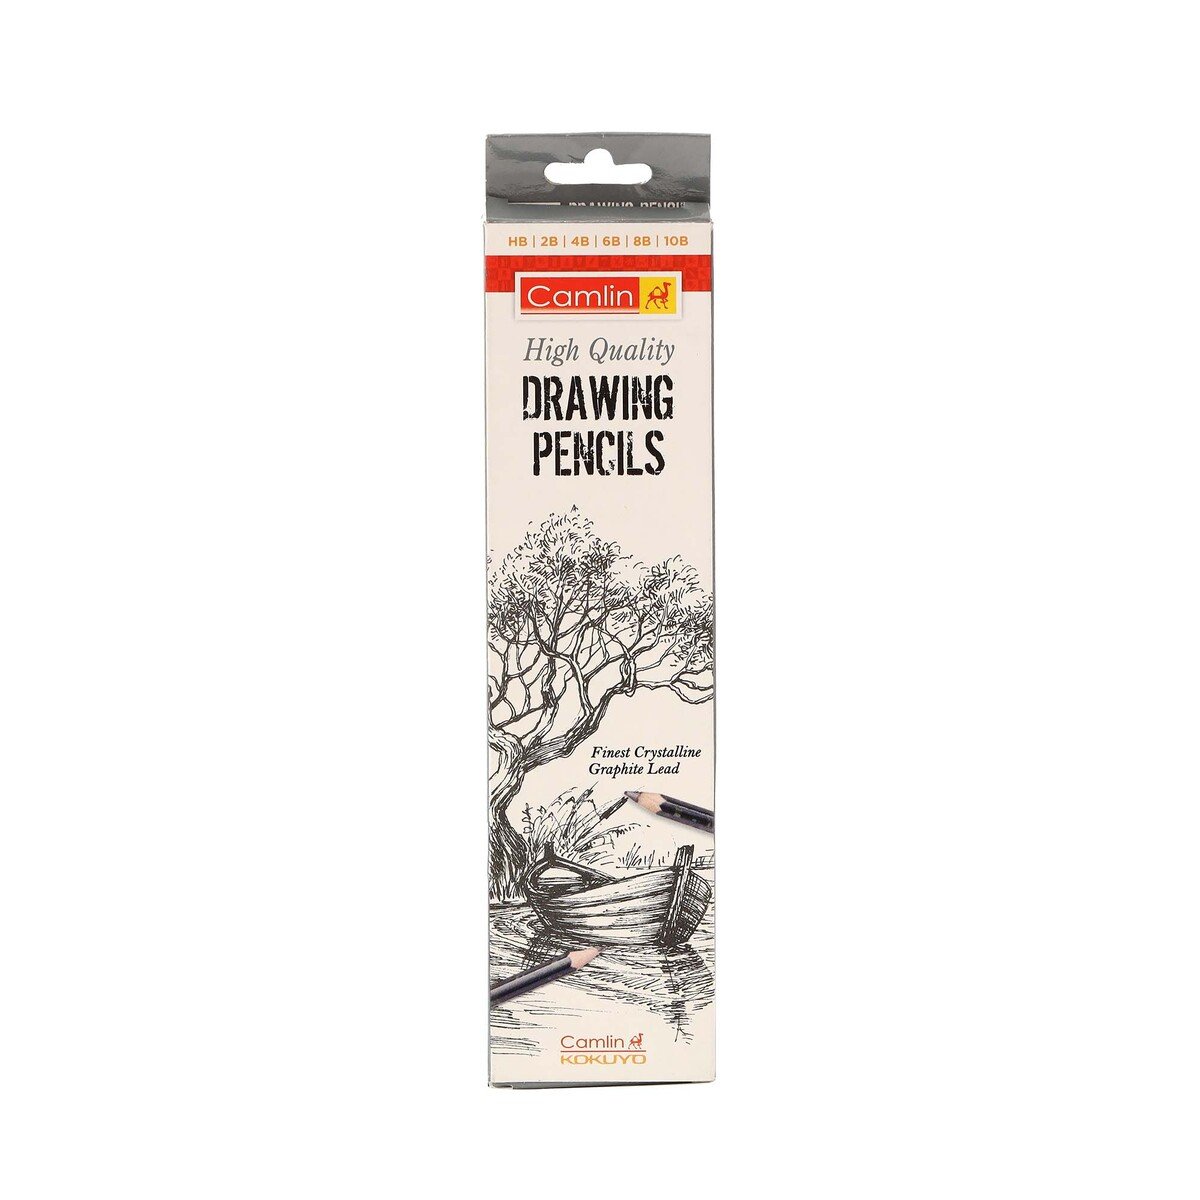 Camlin High Quality Drawing Pencils 6 Shades Assorted